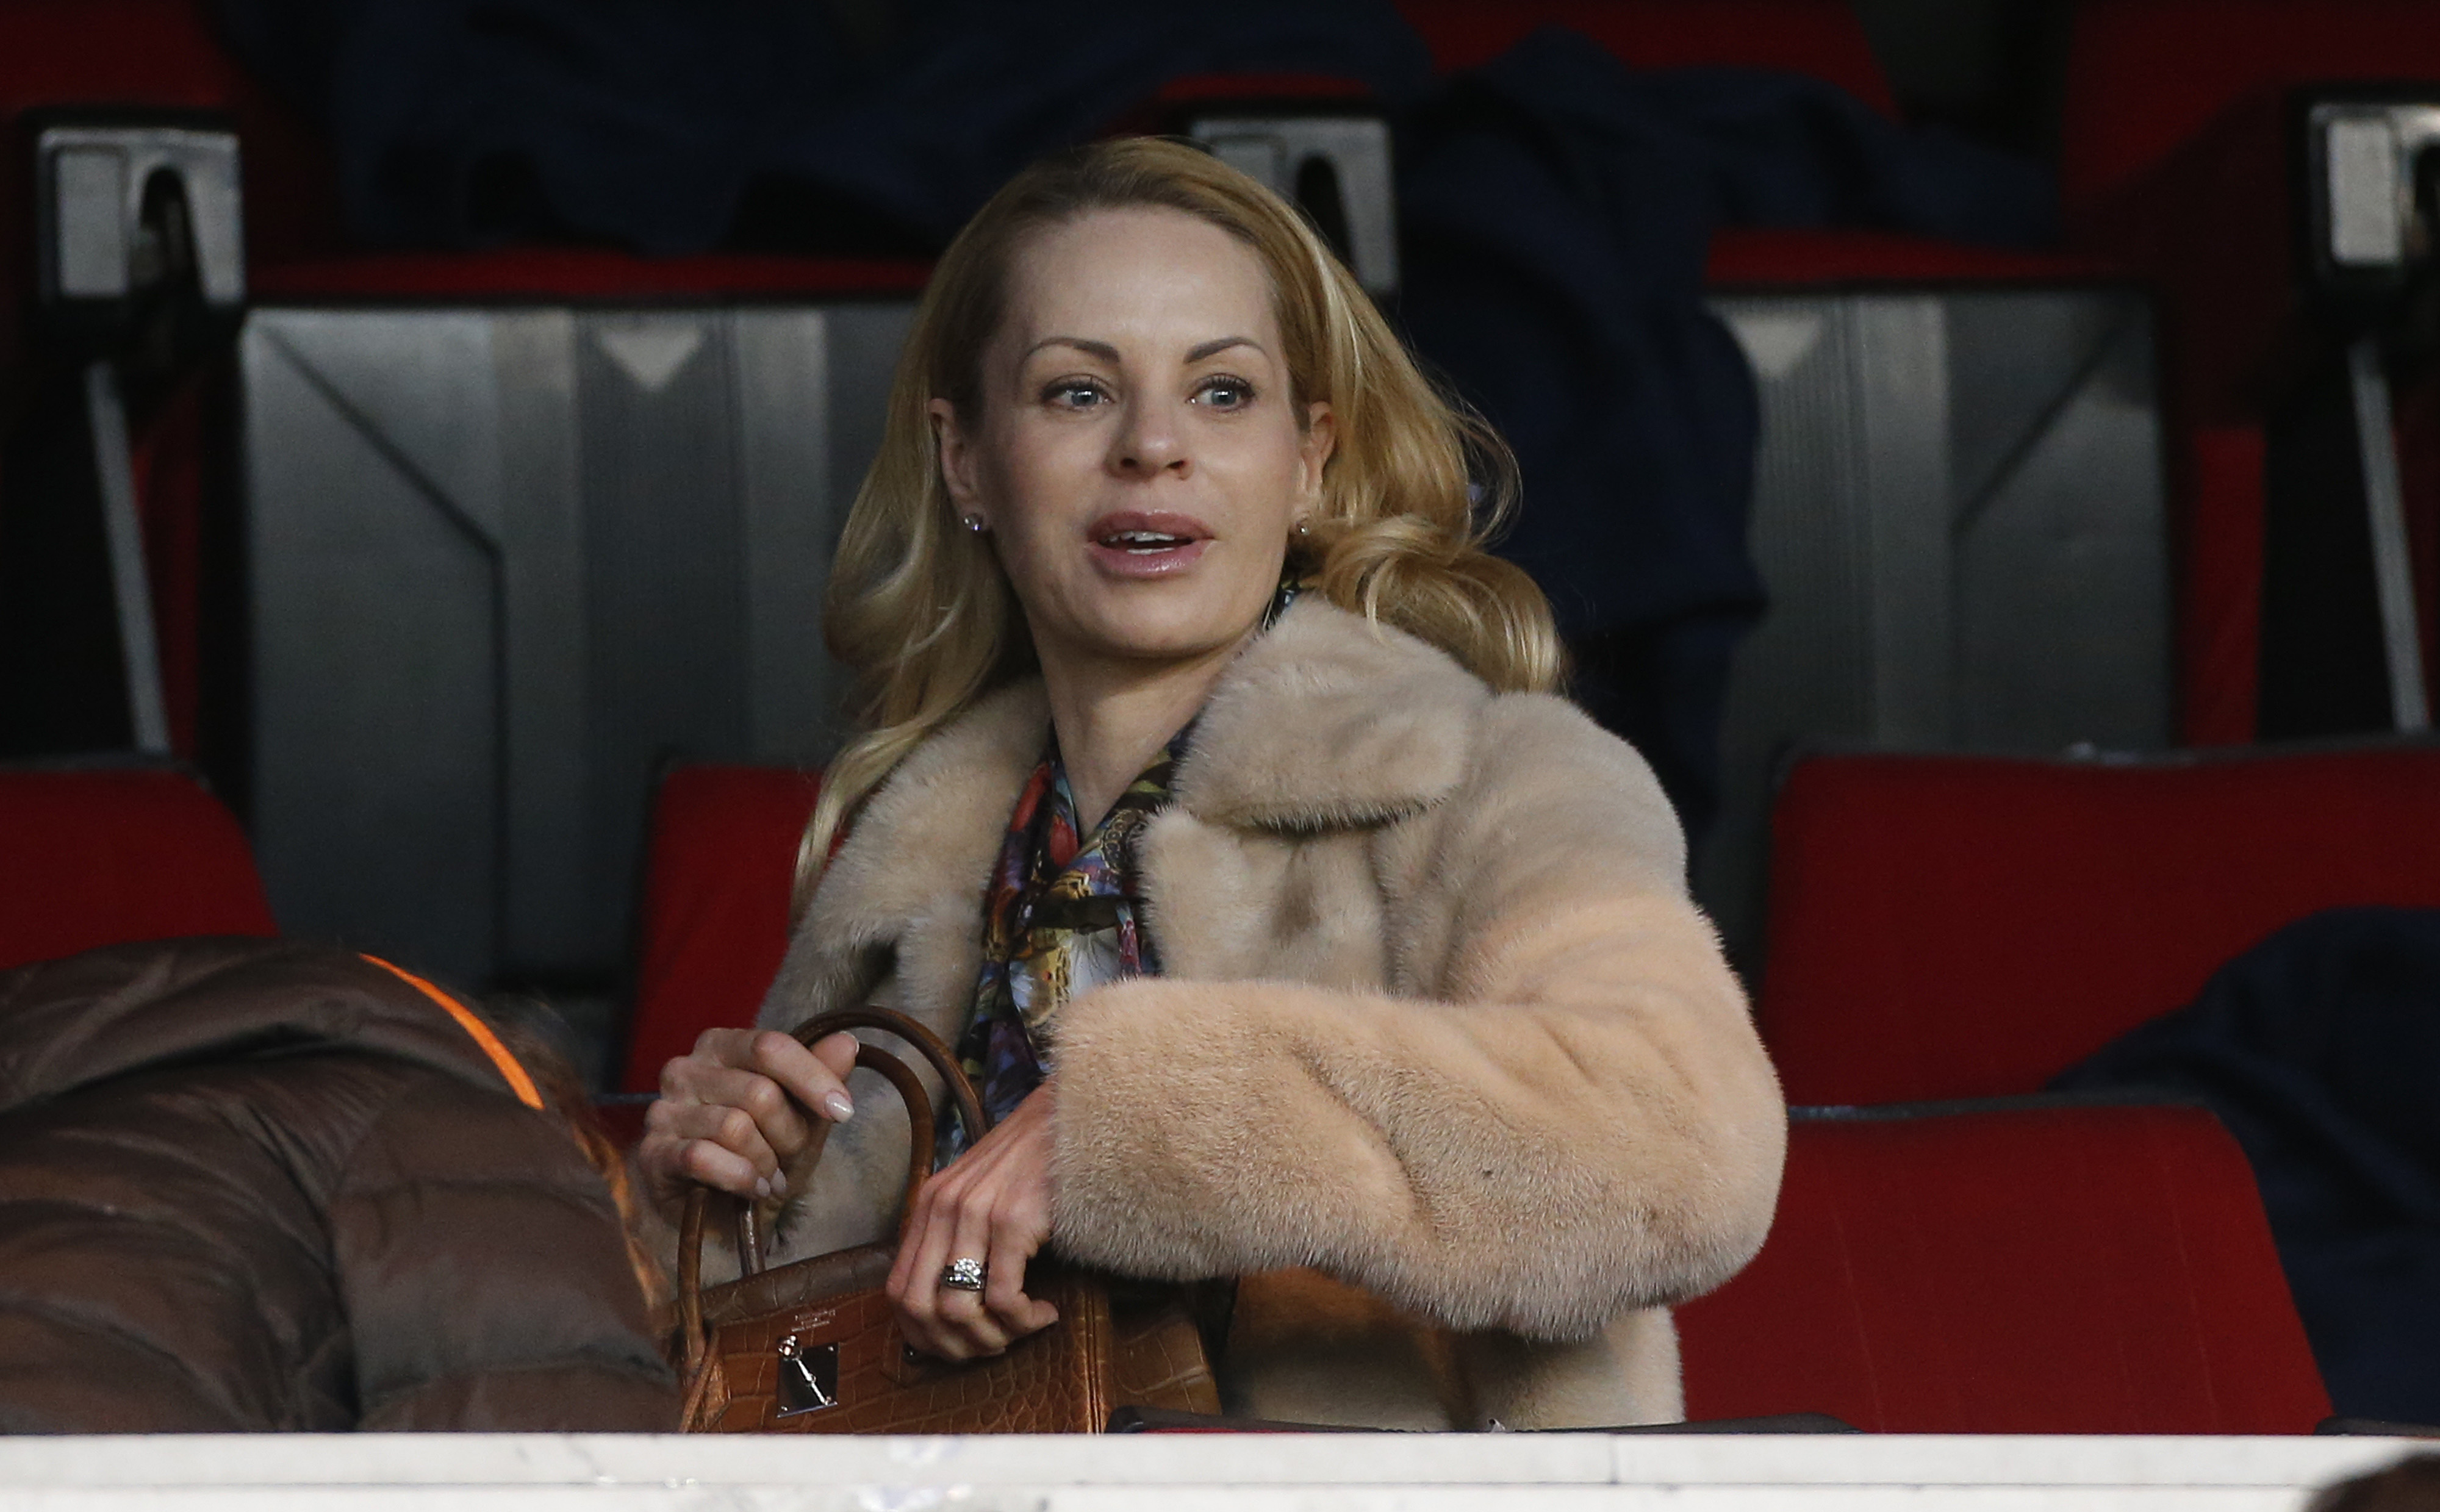 Helena Seger attends the French Ligue 1 match between Paris Saint-Germain FC (PSG) and RC Lens at Parc des Princes stadium on March 7, 2015, in Paris, France. | Source: Getty Images